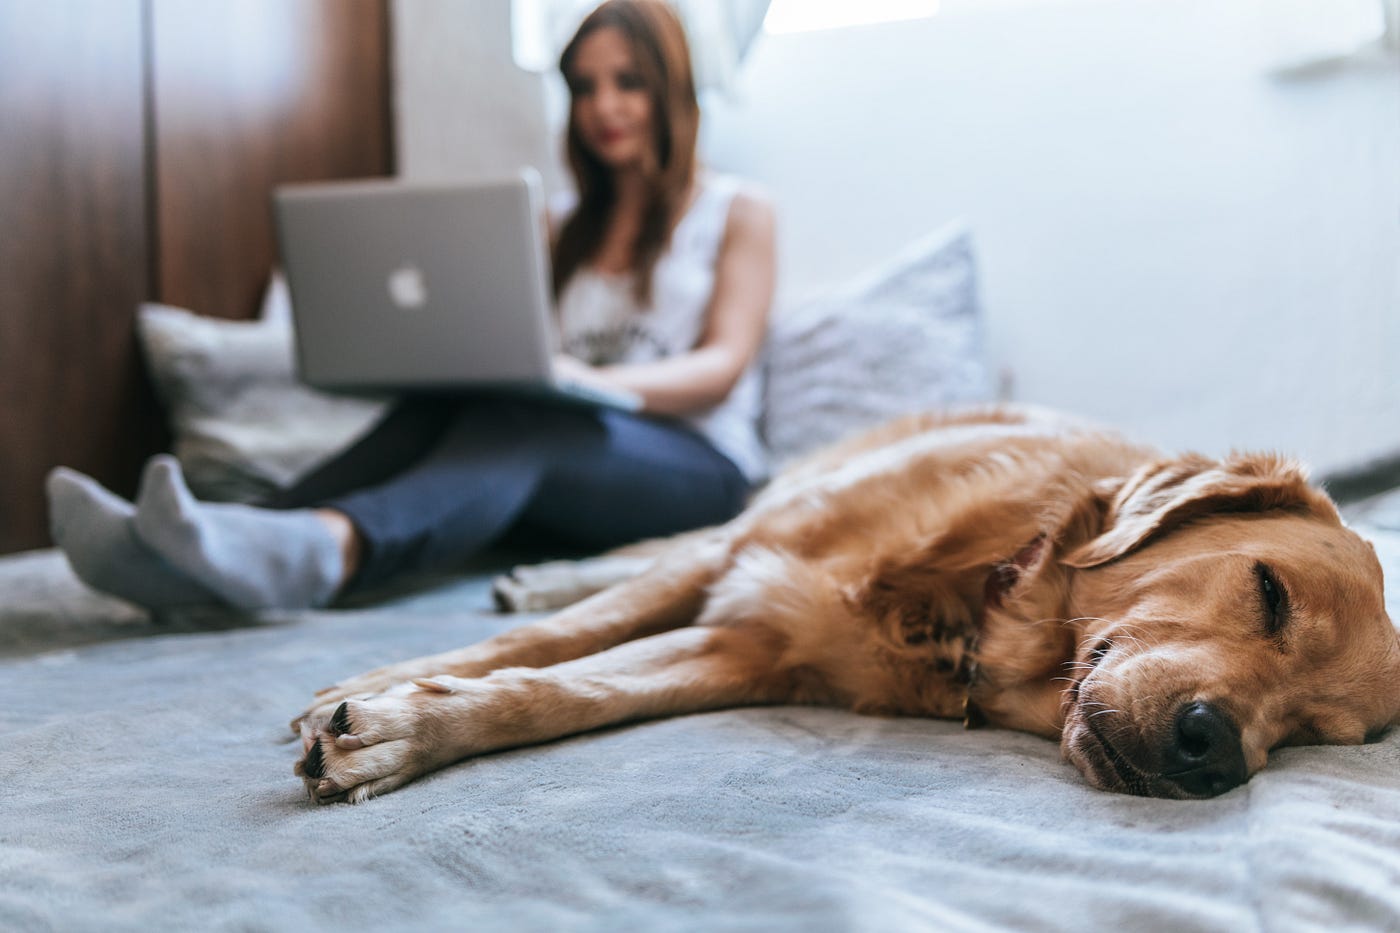 dog on bed with lady on computer